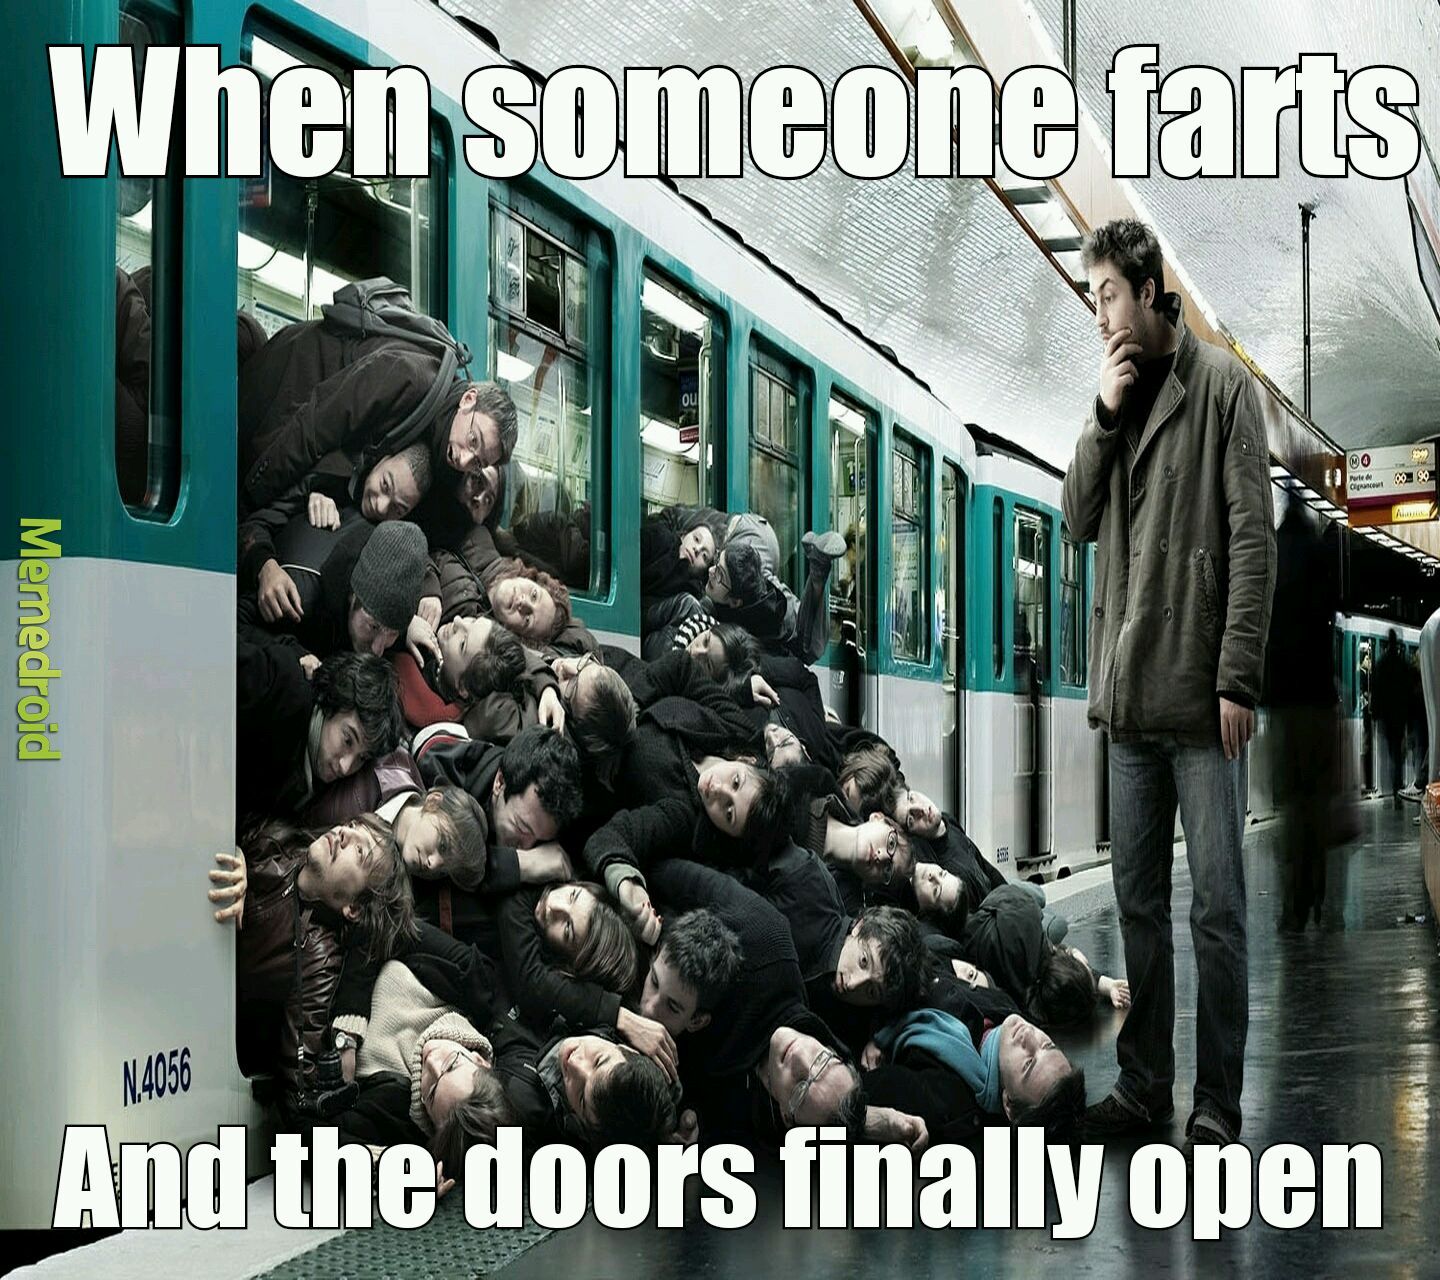 Memedroid: the best site to see, rate and share funny memes! train,fart,pun...